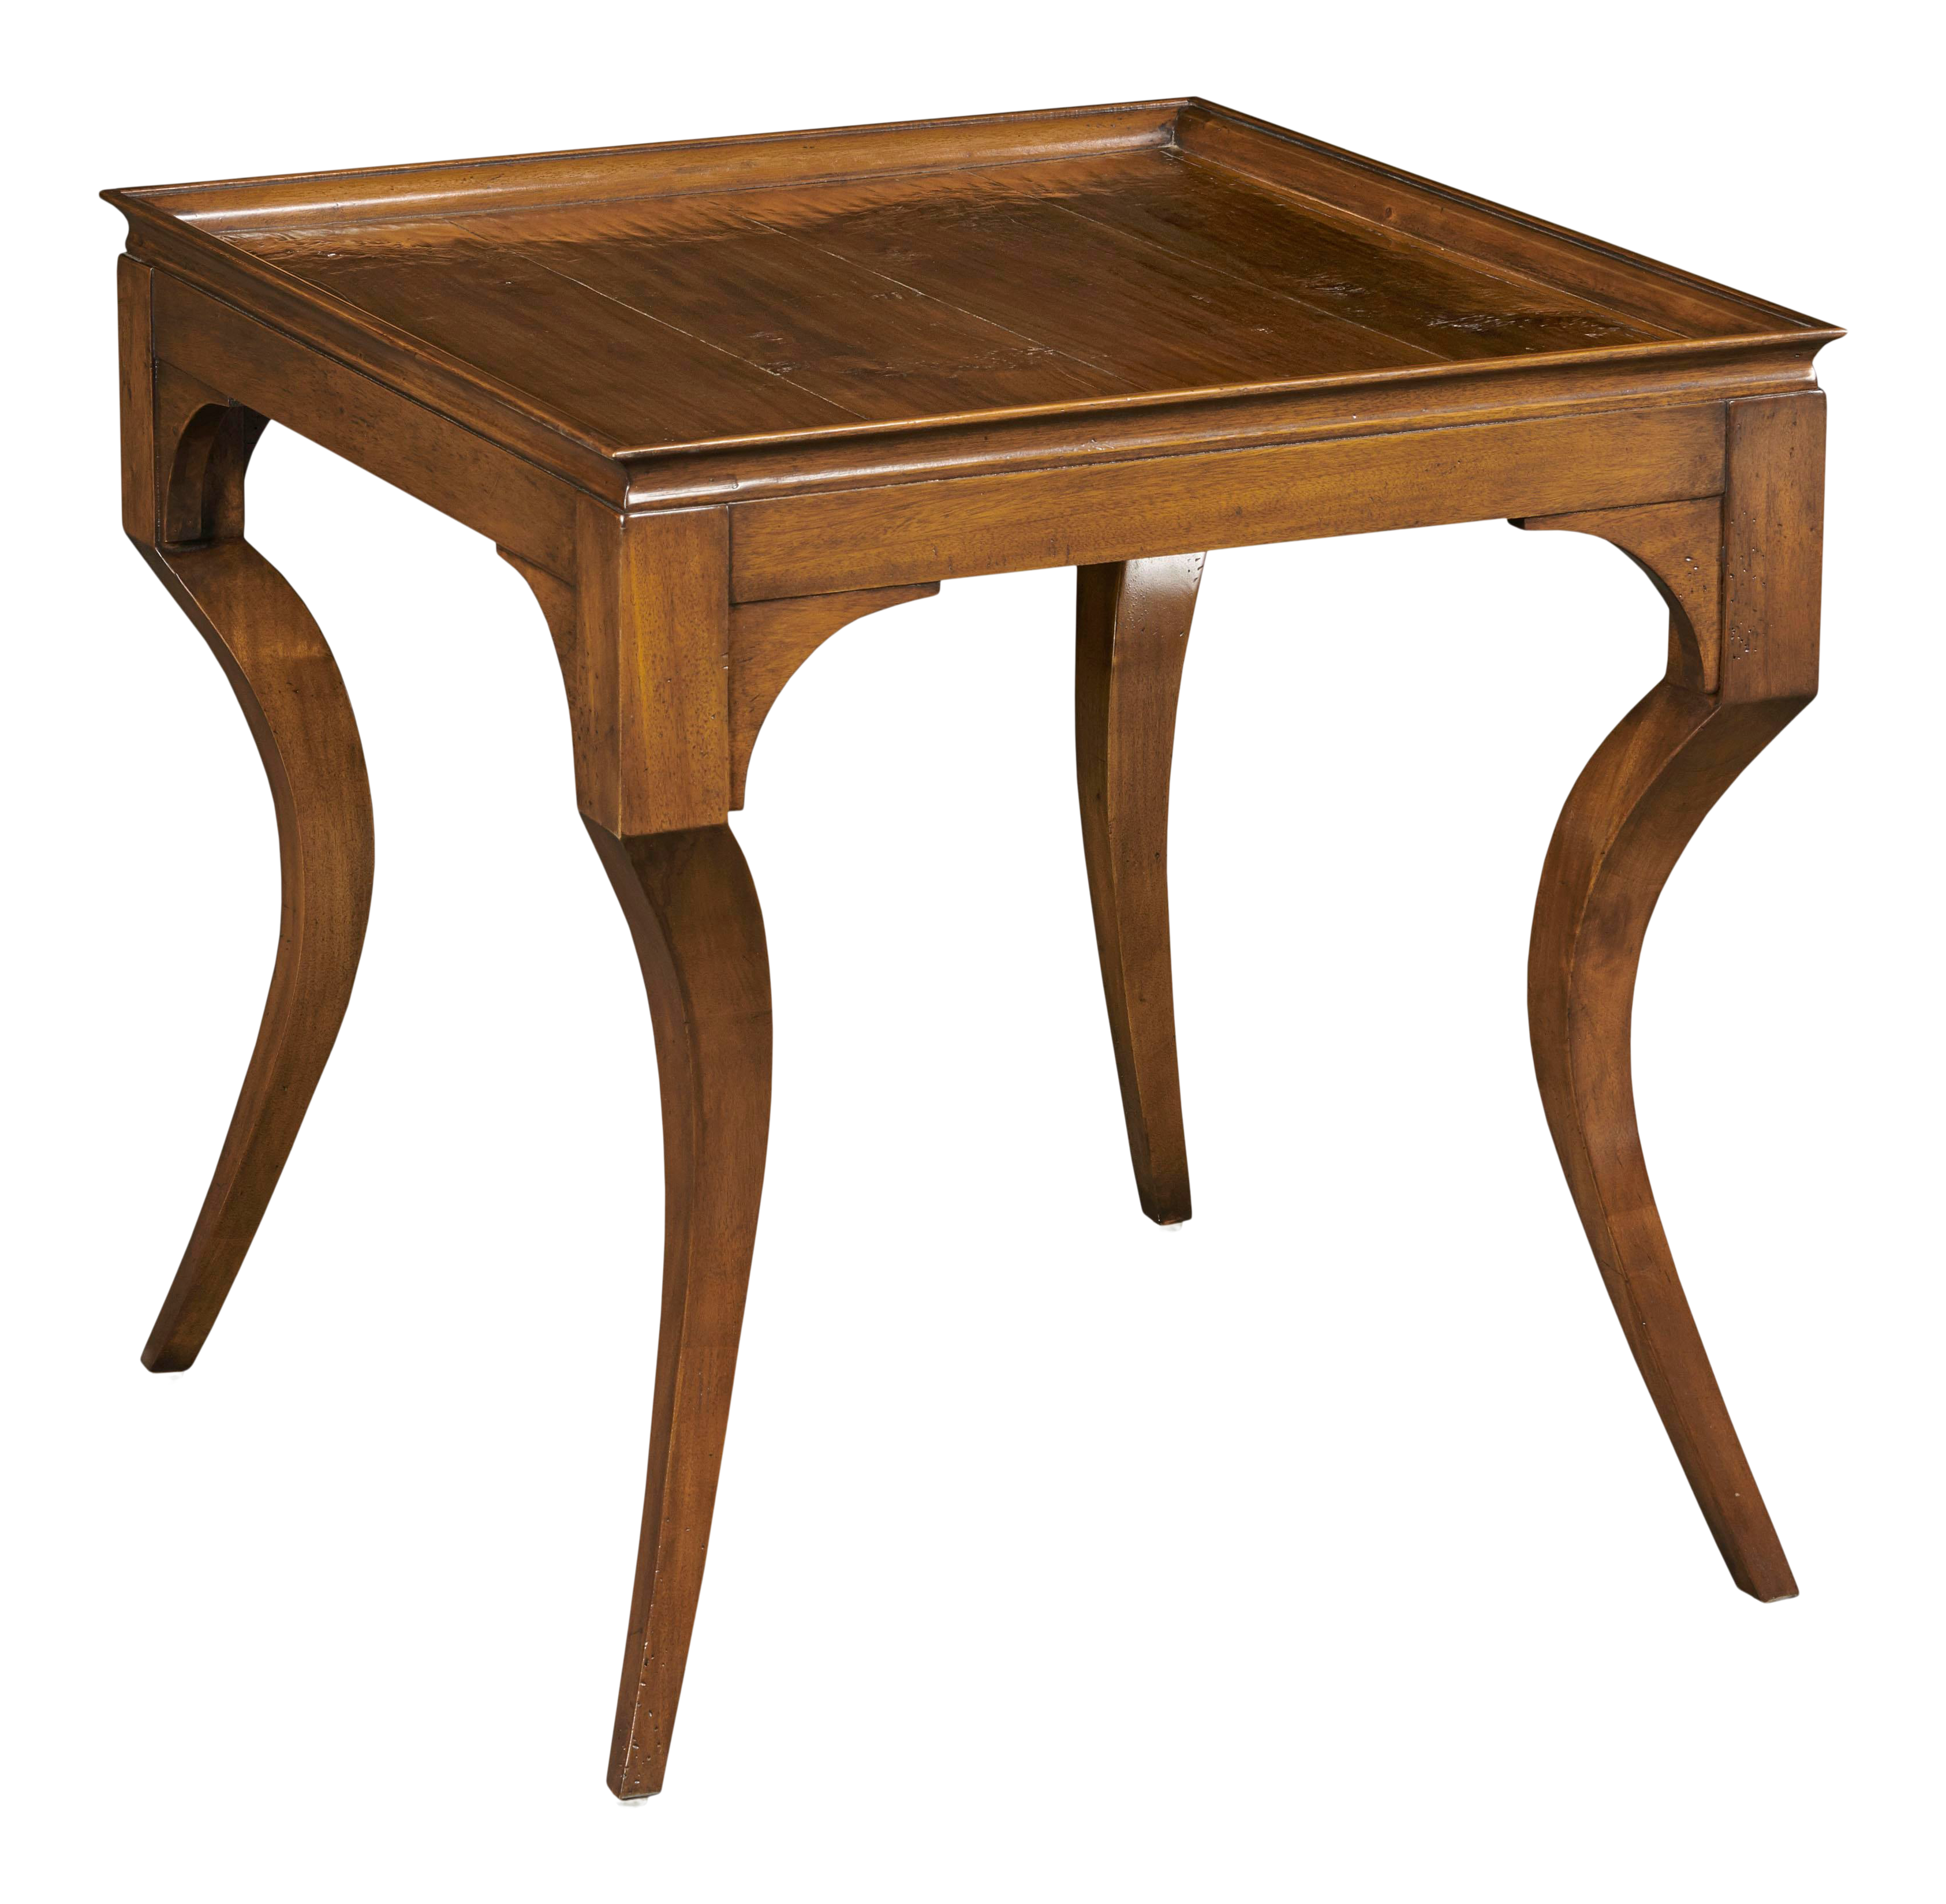 classic traditional furniture